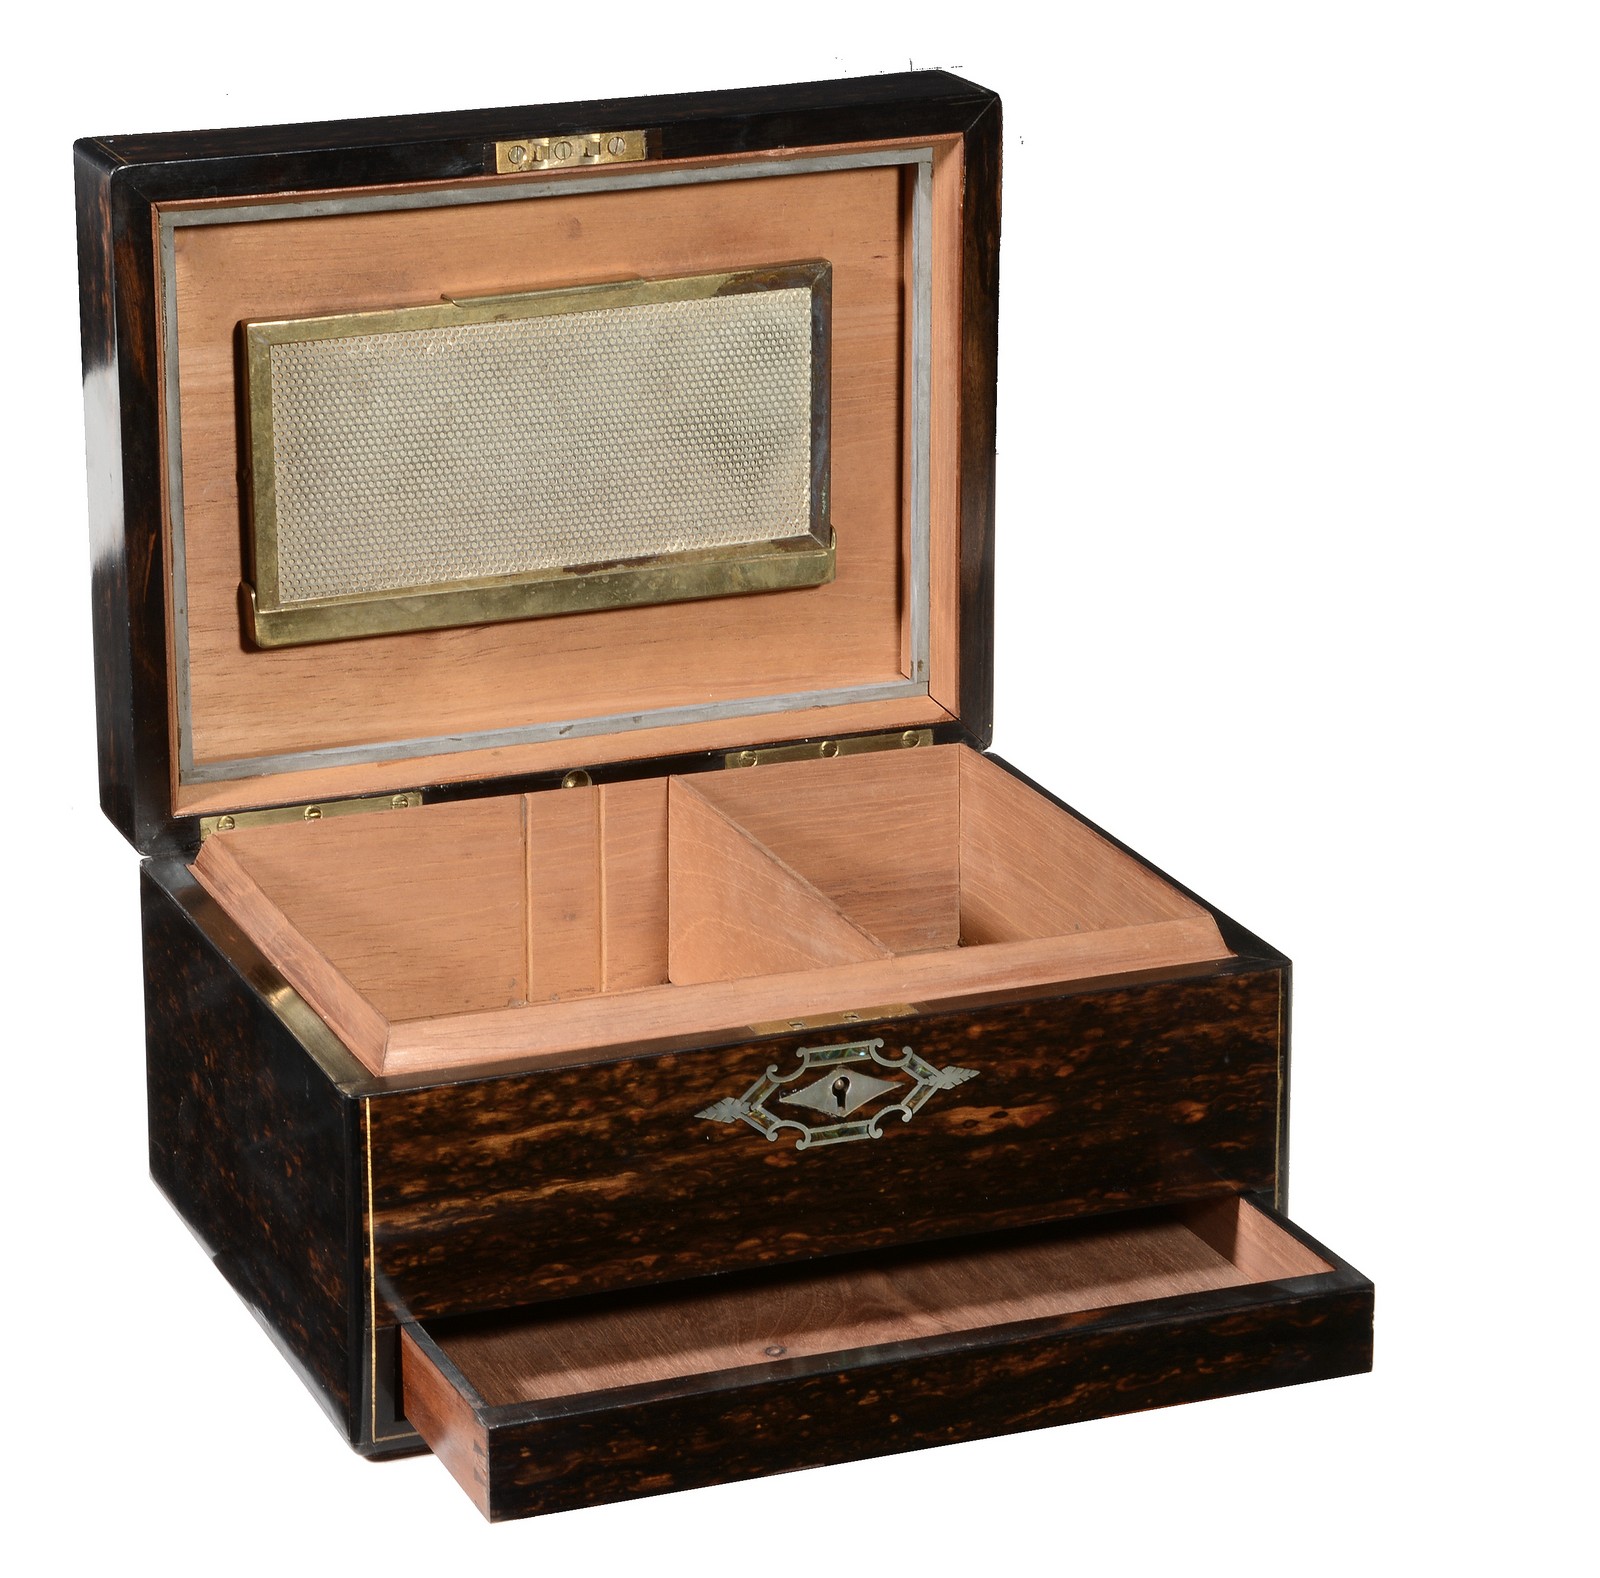 A Victorian coromandel and mother-of-pearl inlaid dressing case refitted as a humidor, circa 1880 - Image 2 of 2